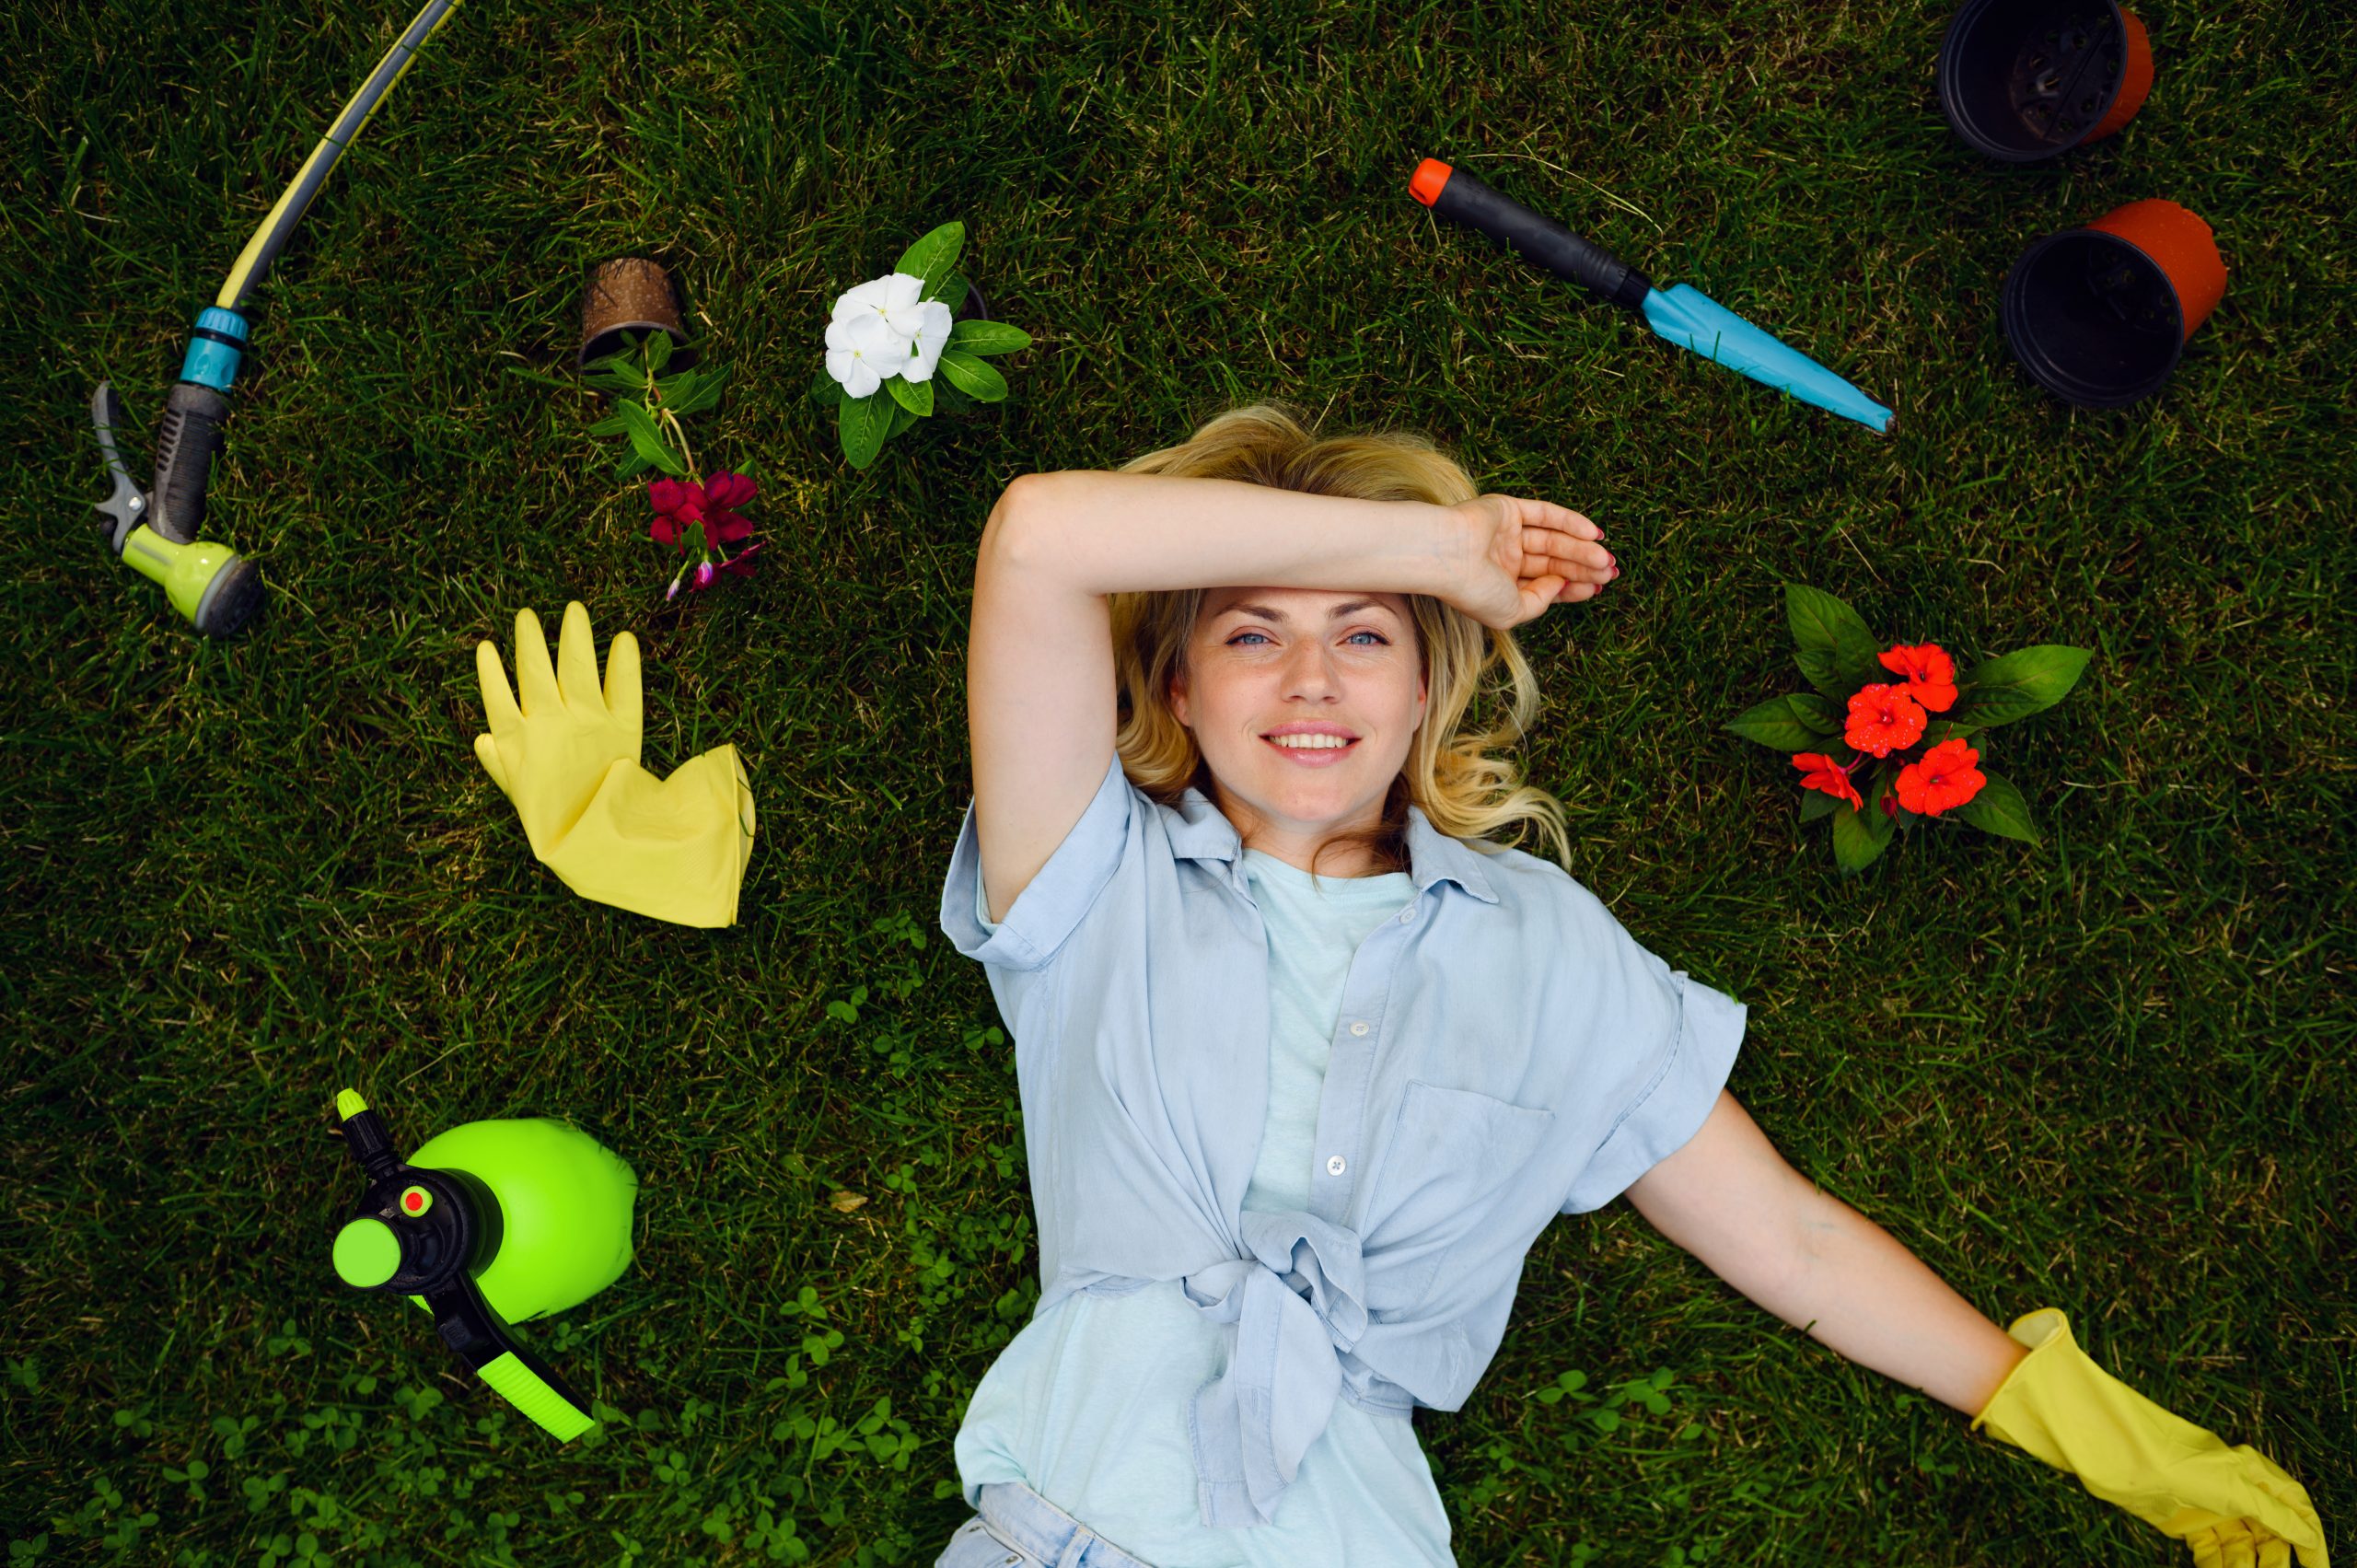 young woman lying on the grass in the garden among gardening tools top view female gardener takes care of plants outdoor gardening hobby florist lifestyle and leisure scaled